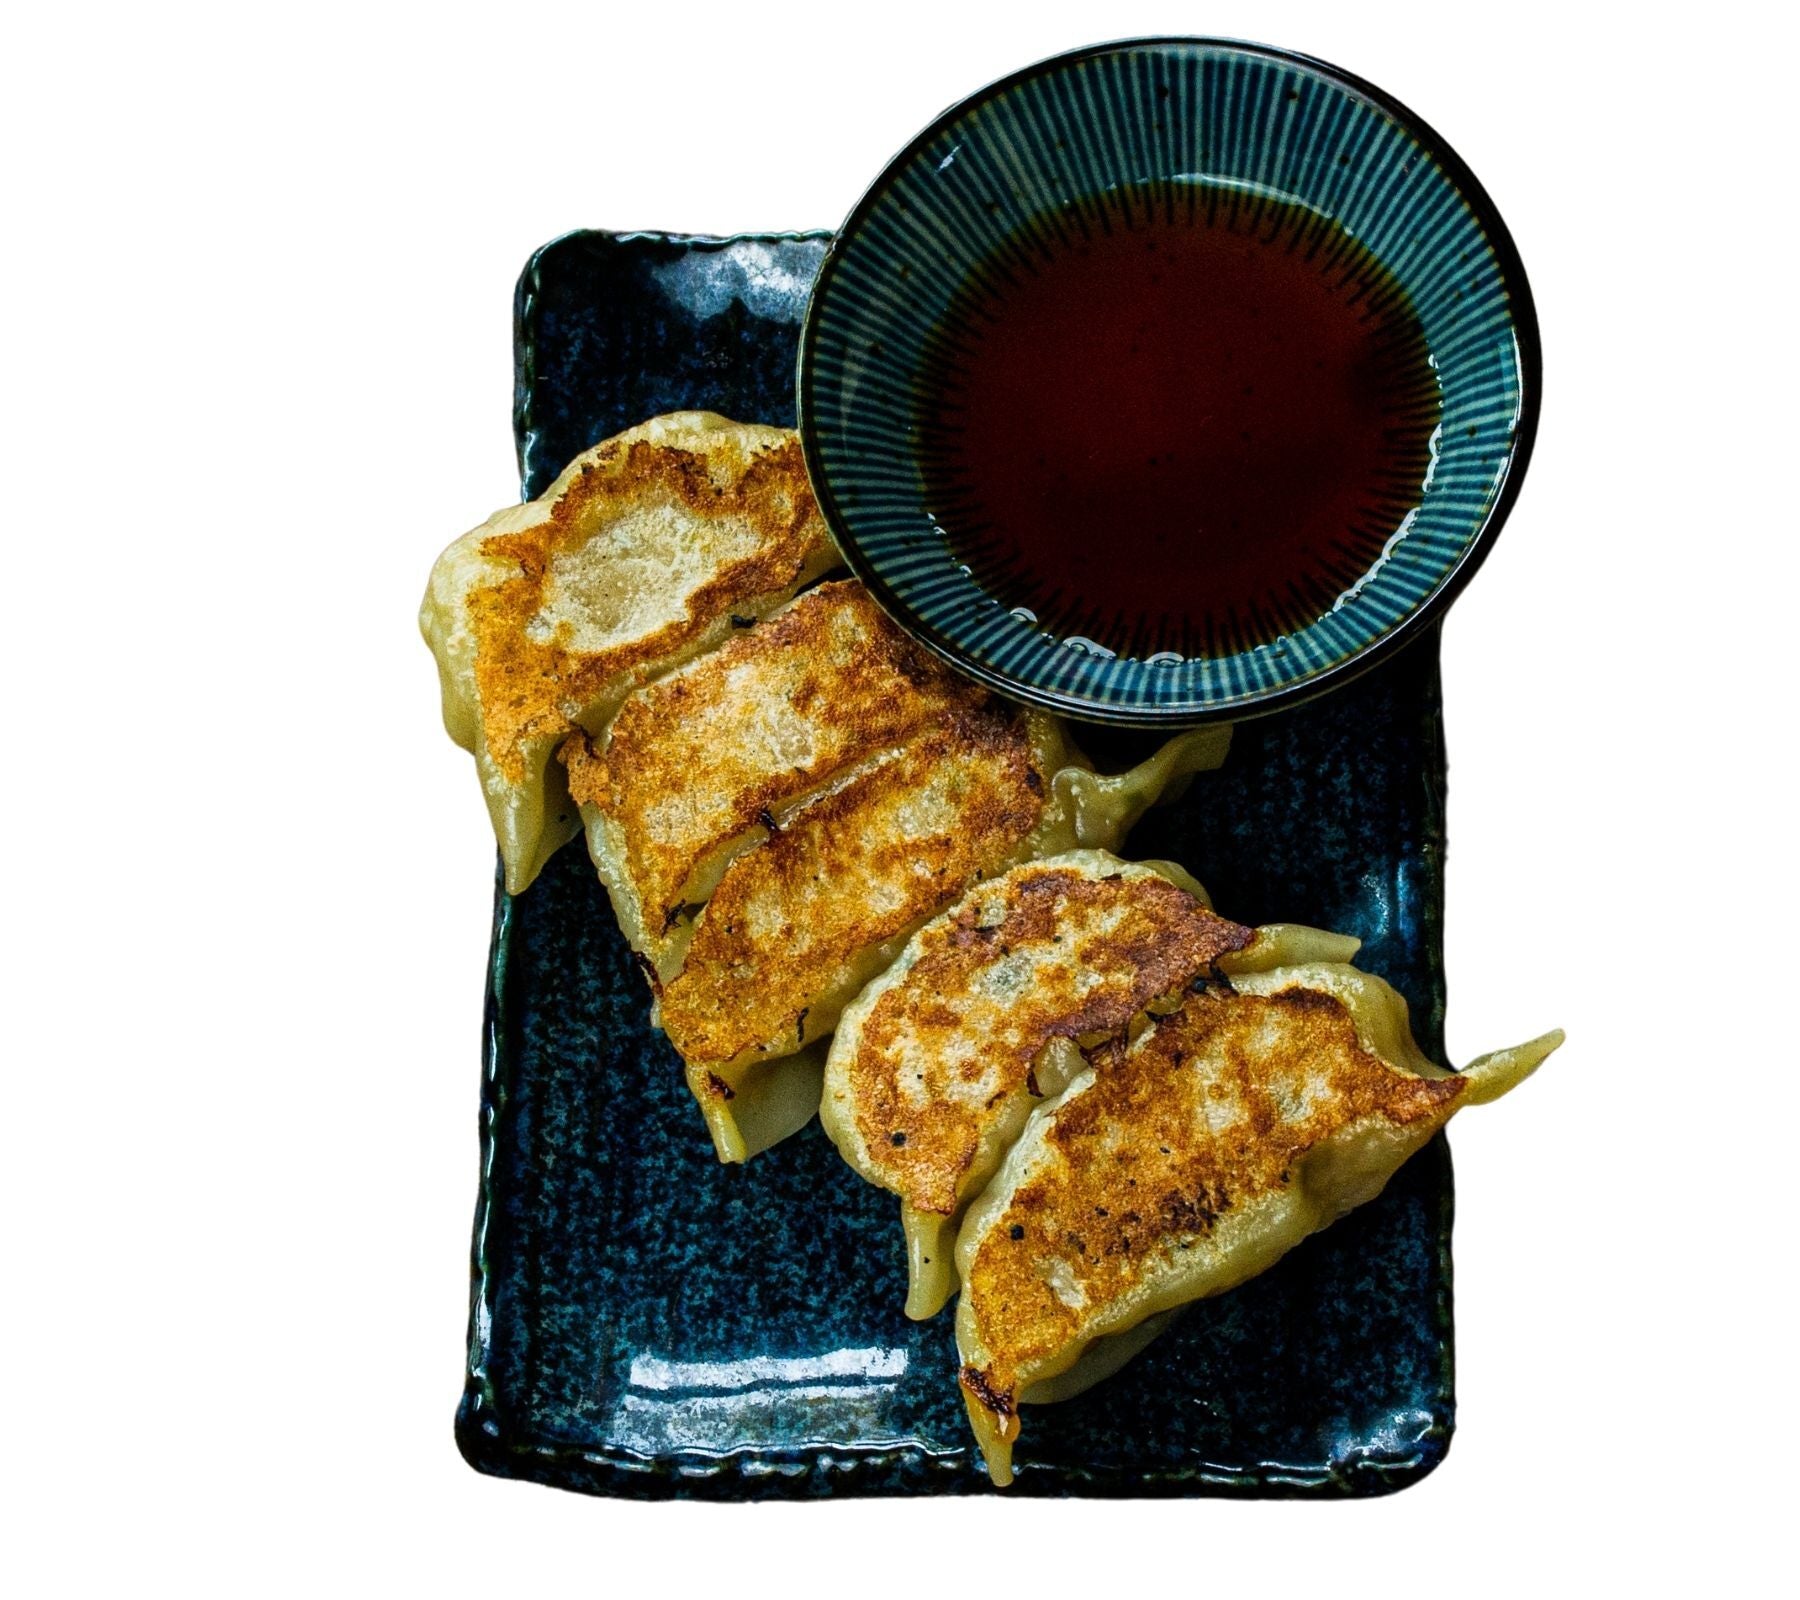 Fried gyoza with sauce on the side